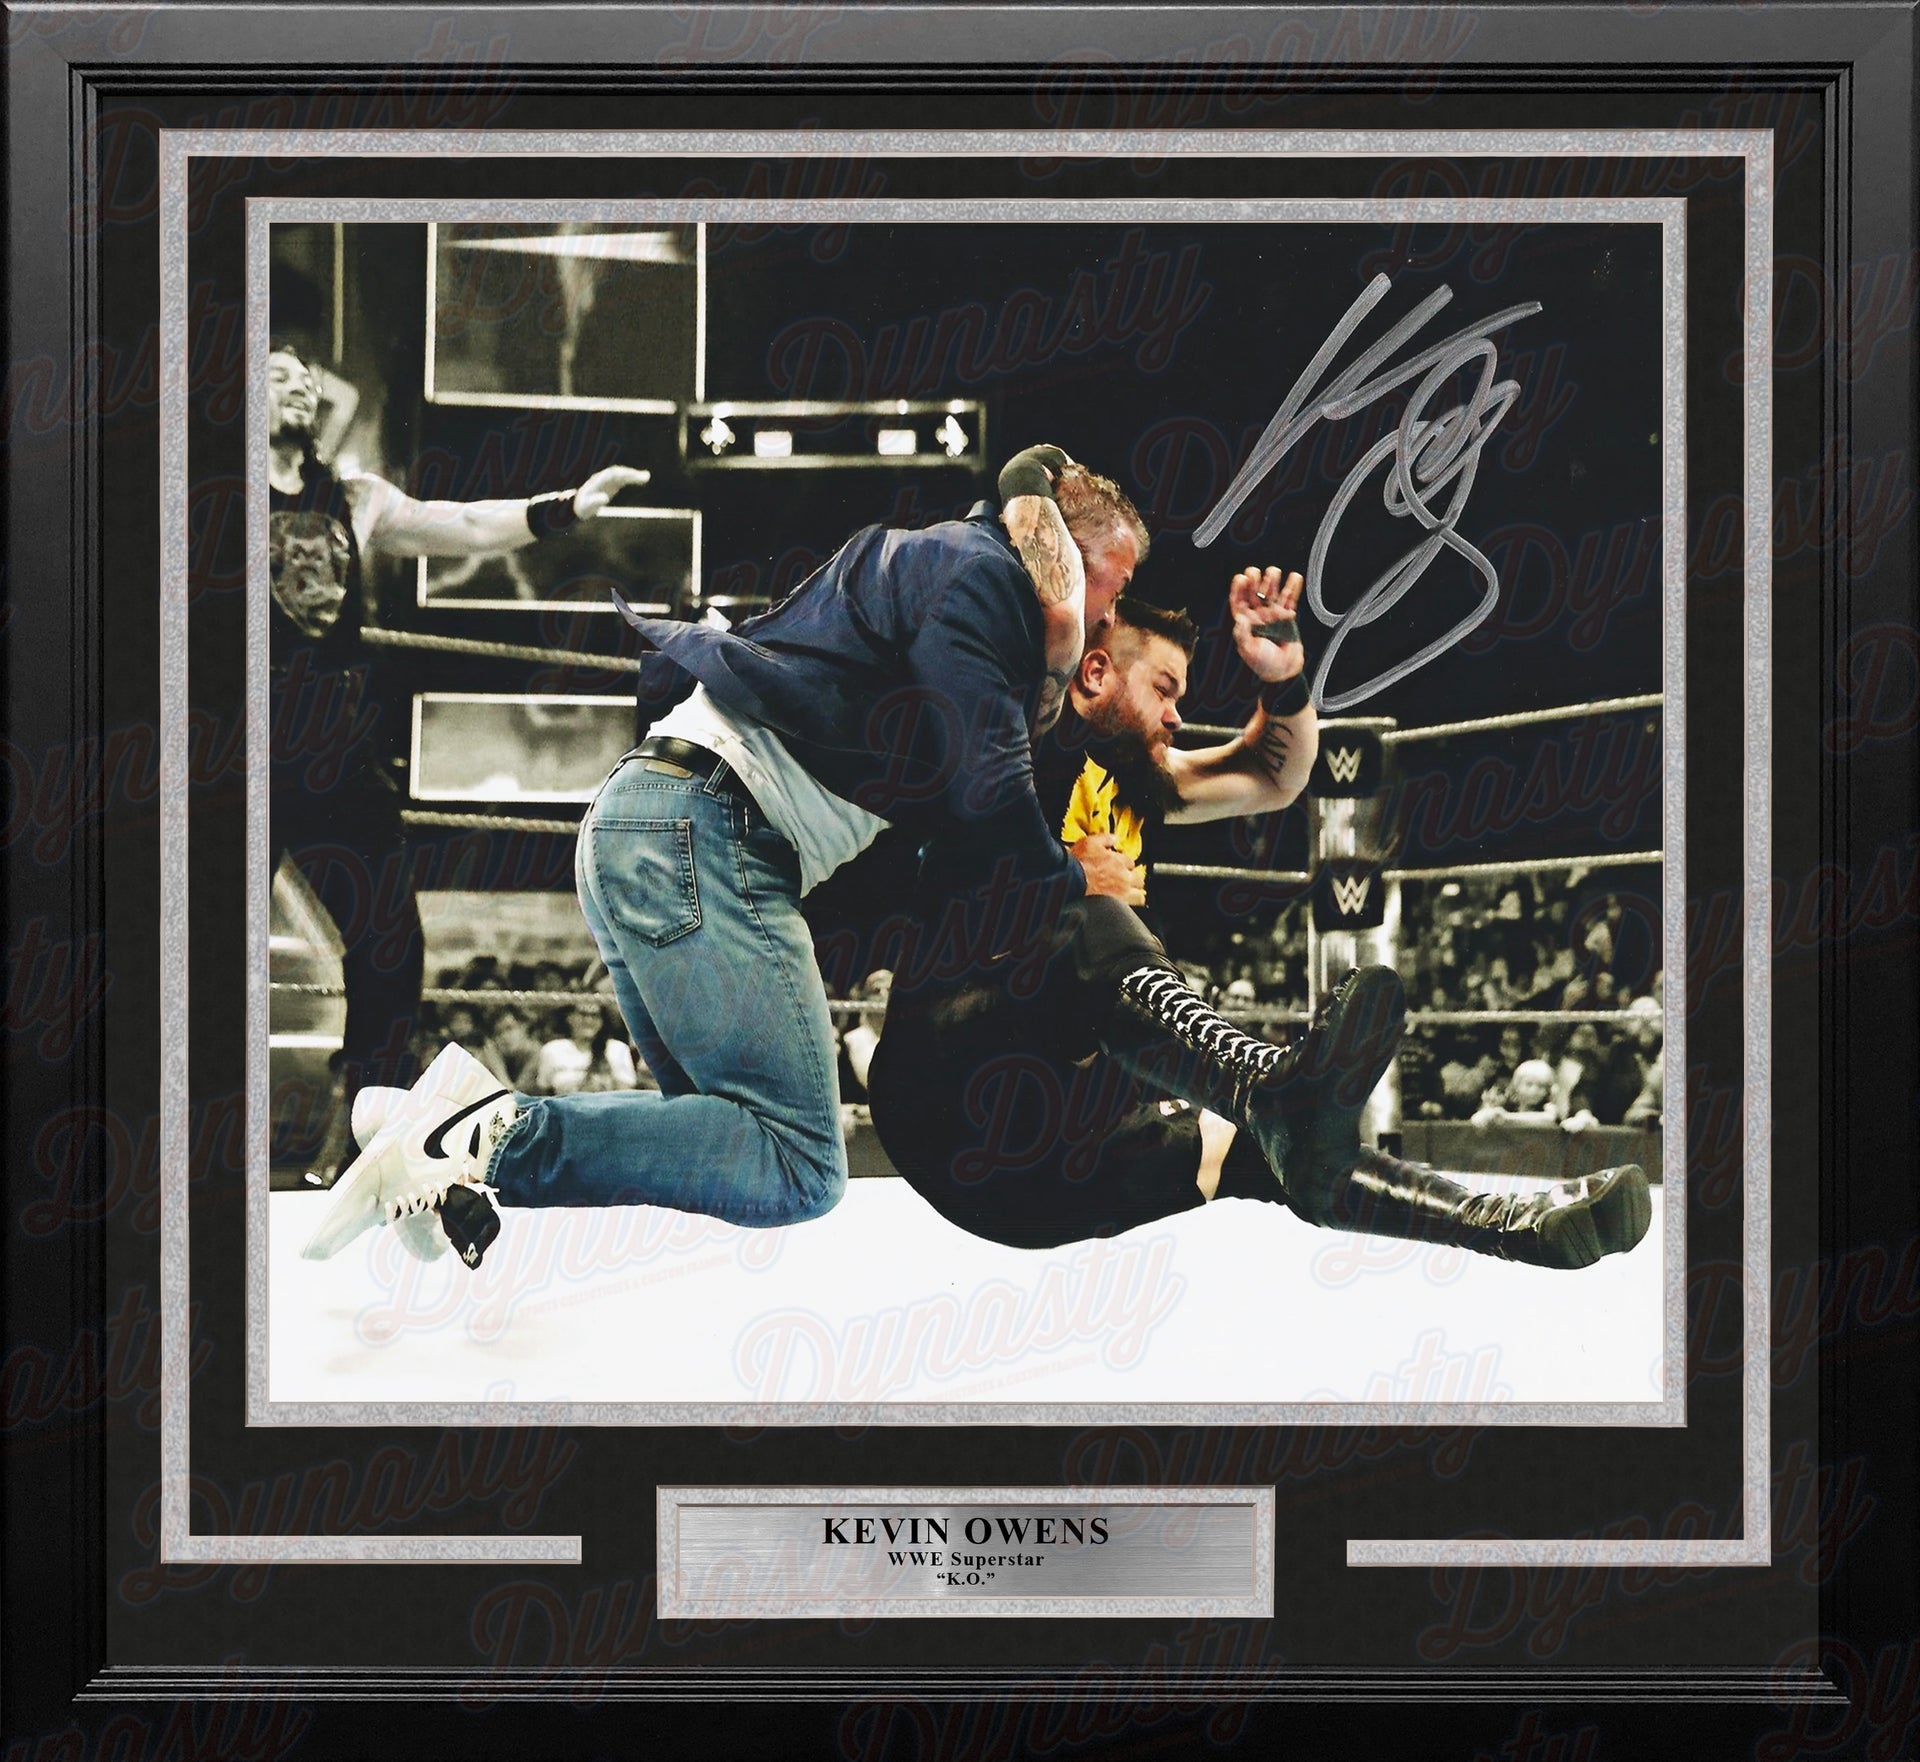 Kevin Owens Autographed WWE Wrestling Stunning Shane McMahon Framed and Matted Photo - Dynasty Sports & Framing 